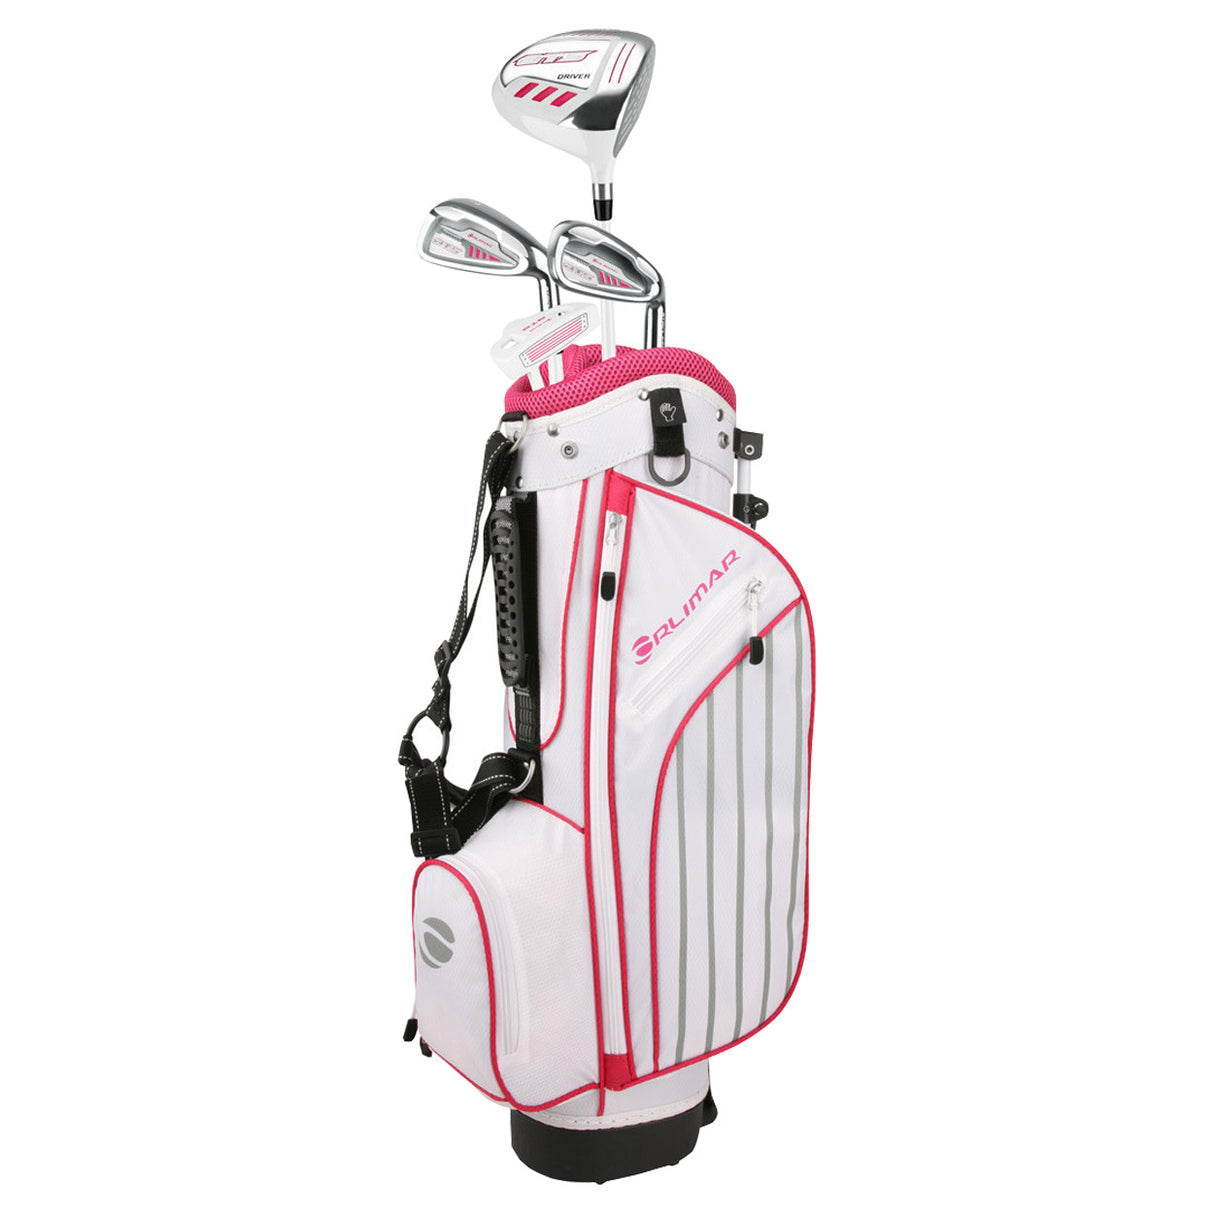 Orlimar ATS Junior Girls' Golf Set with Stand Bag (Ages 5-8)